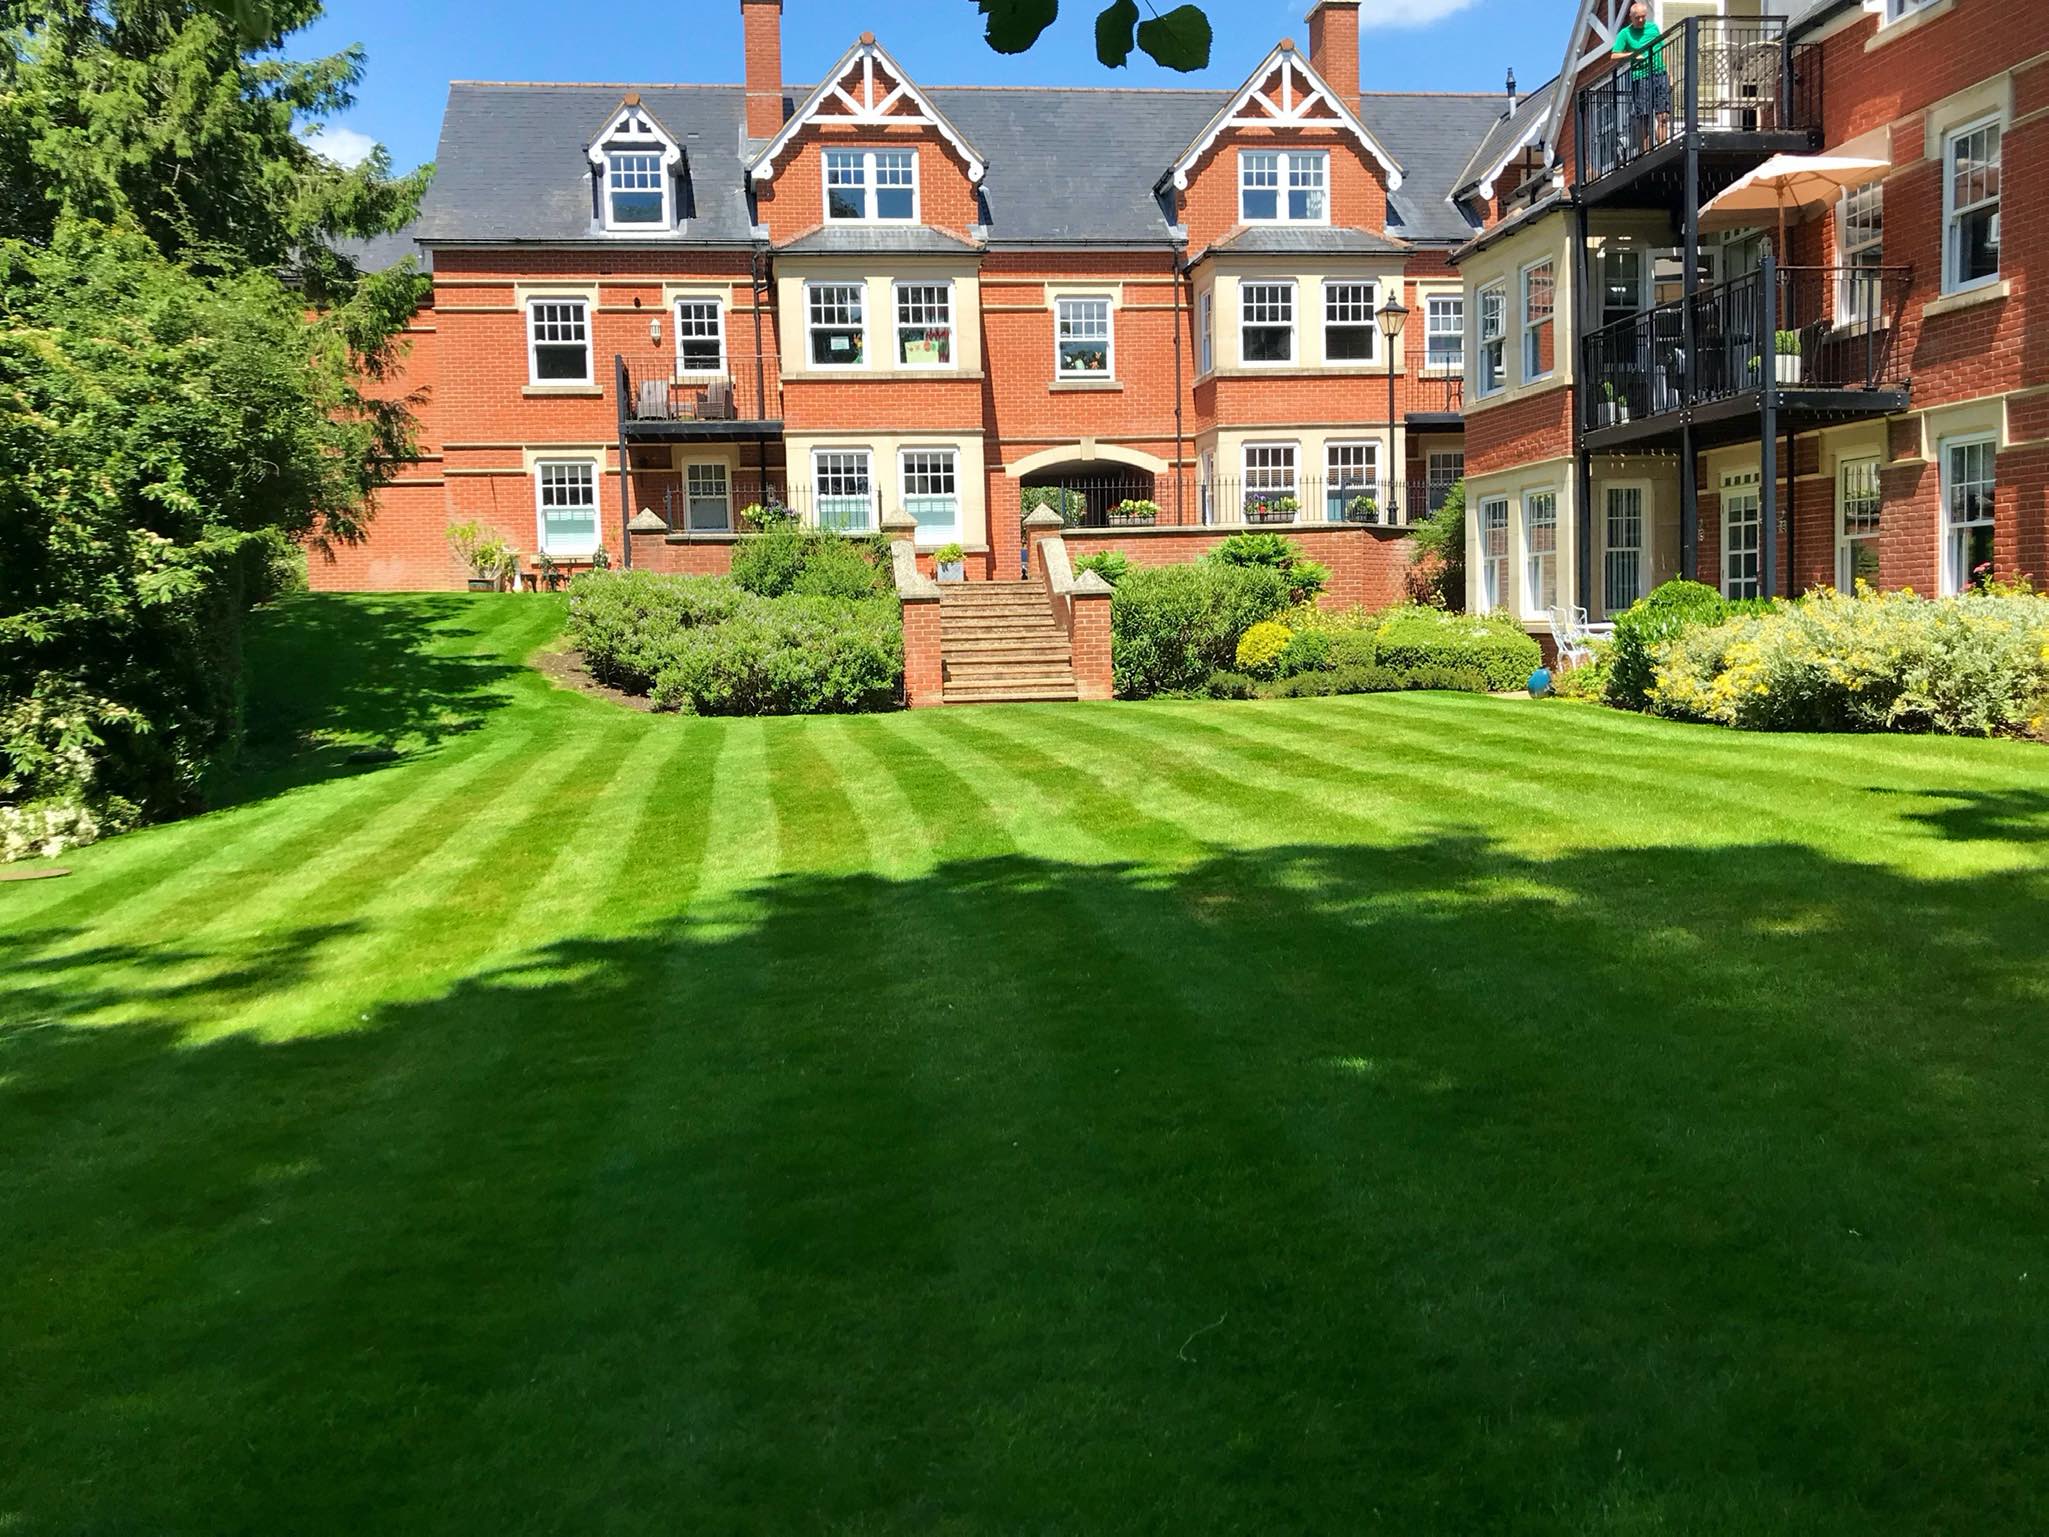 Beautiful healthy green lawn with red brick house sun shining blue sky